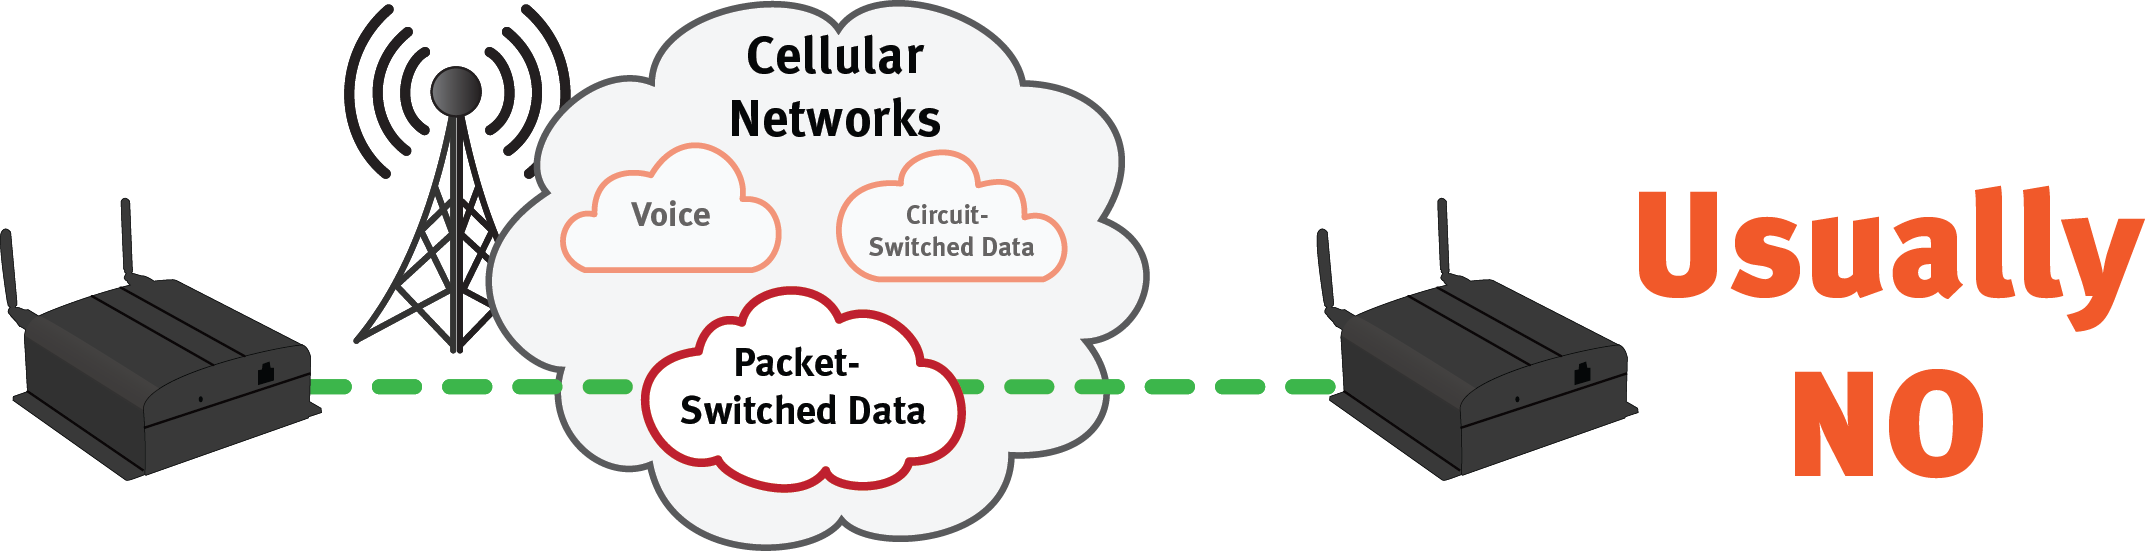 Cellular Data Network- Packet Switched Data does not do Peer-to-Peer